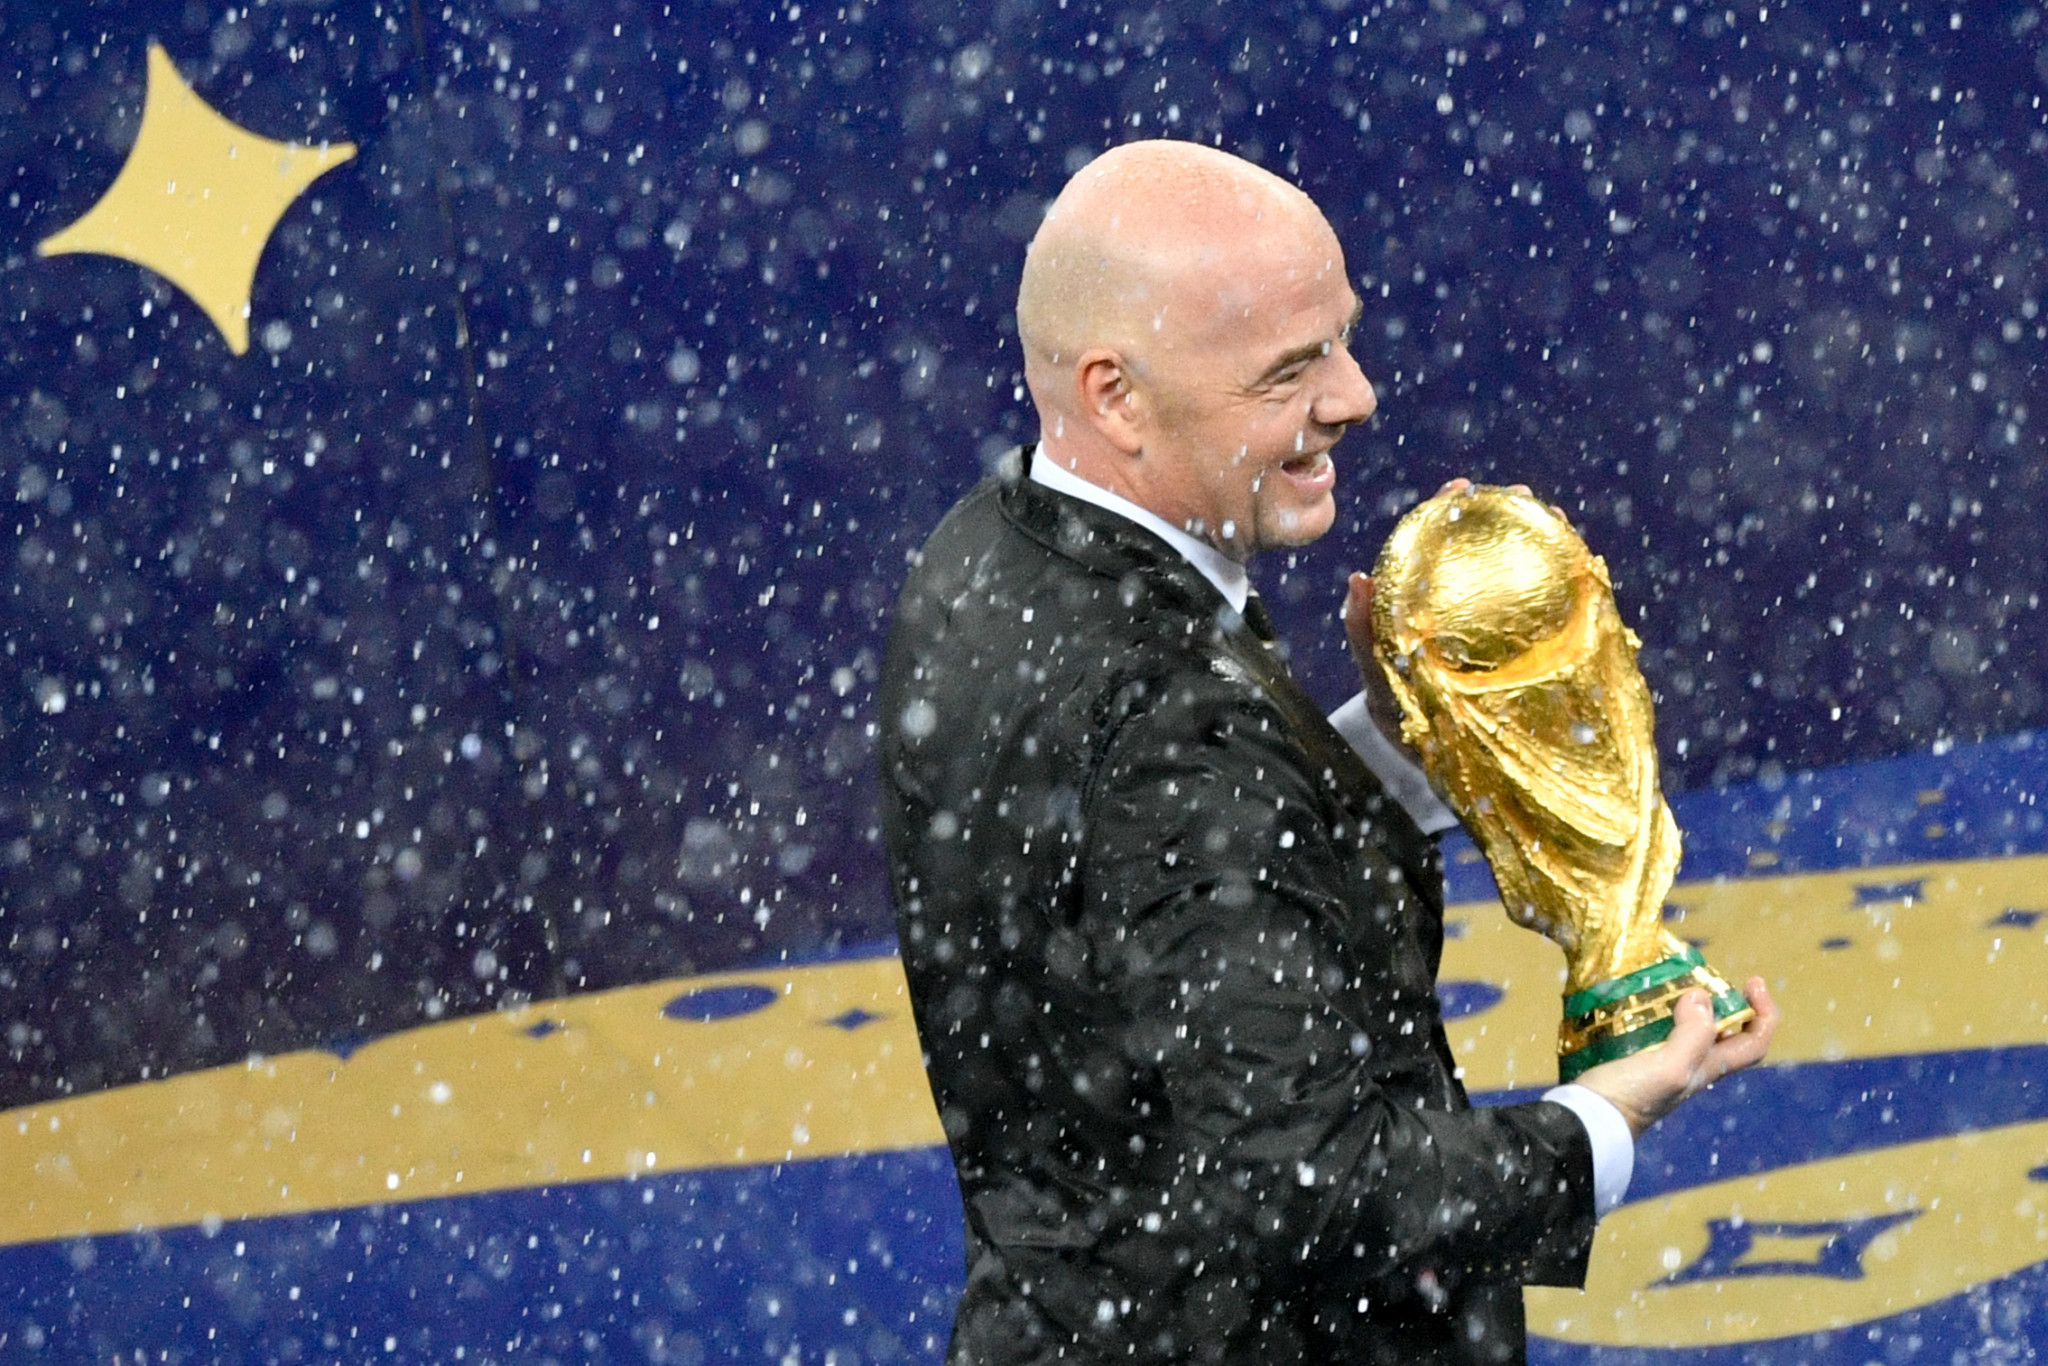 FIFA accused of ignoring own rules over potential 2034 World Cup in Saudi Arabia